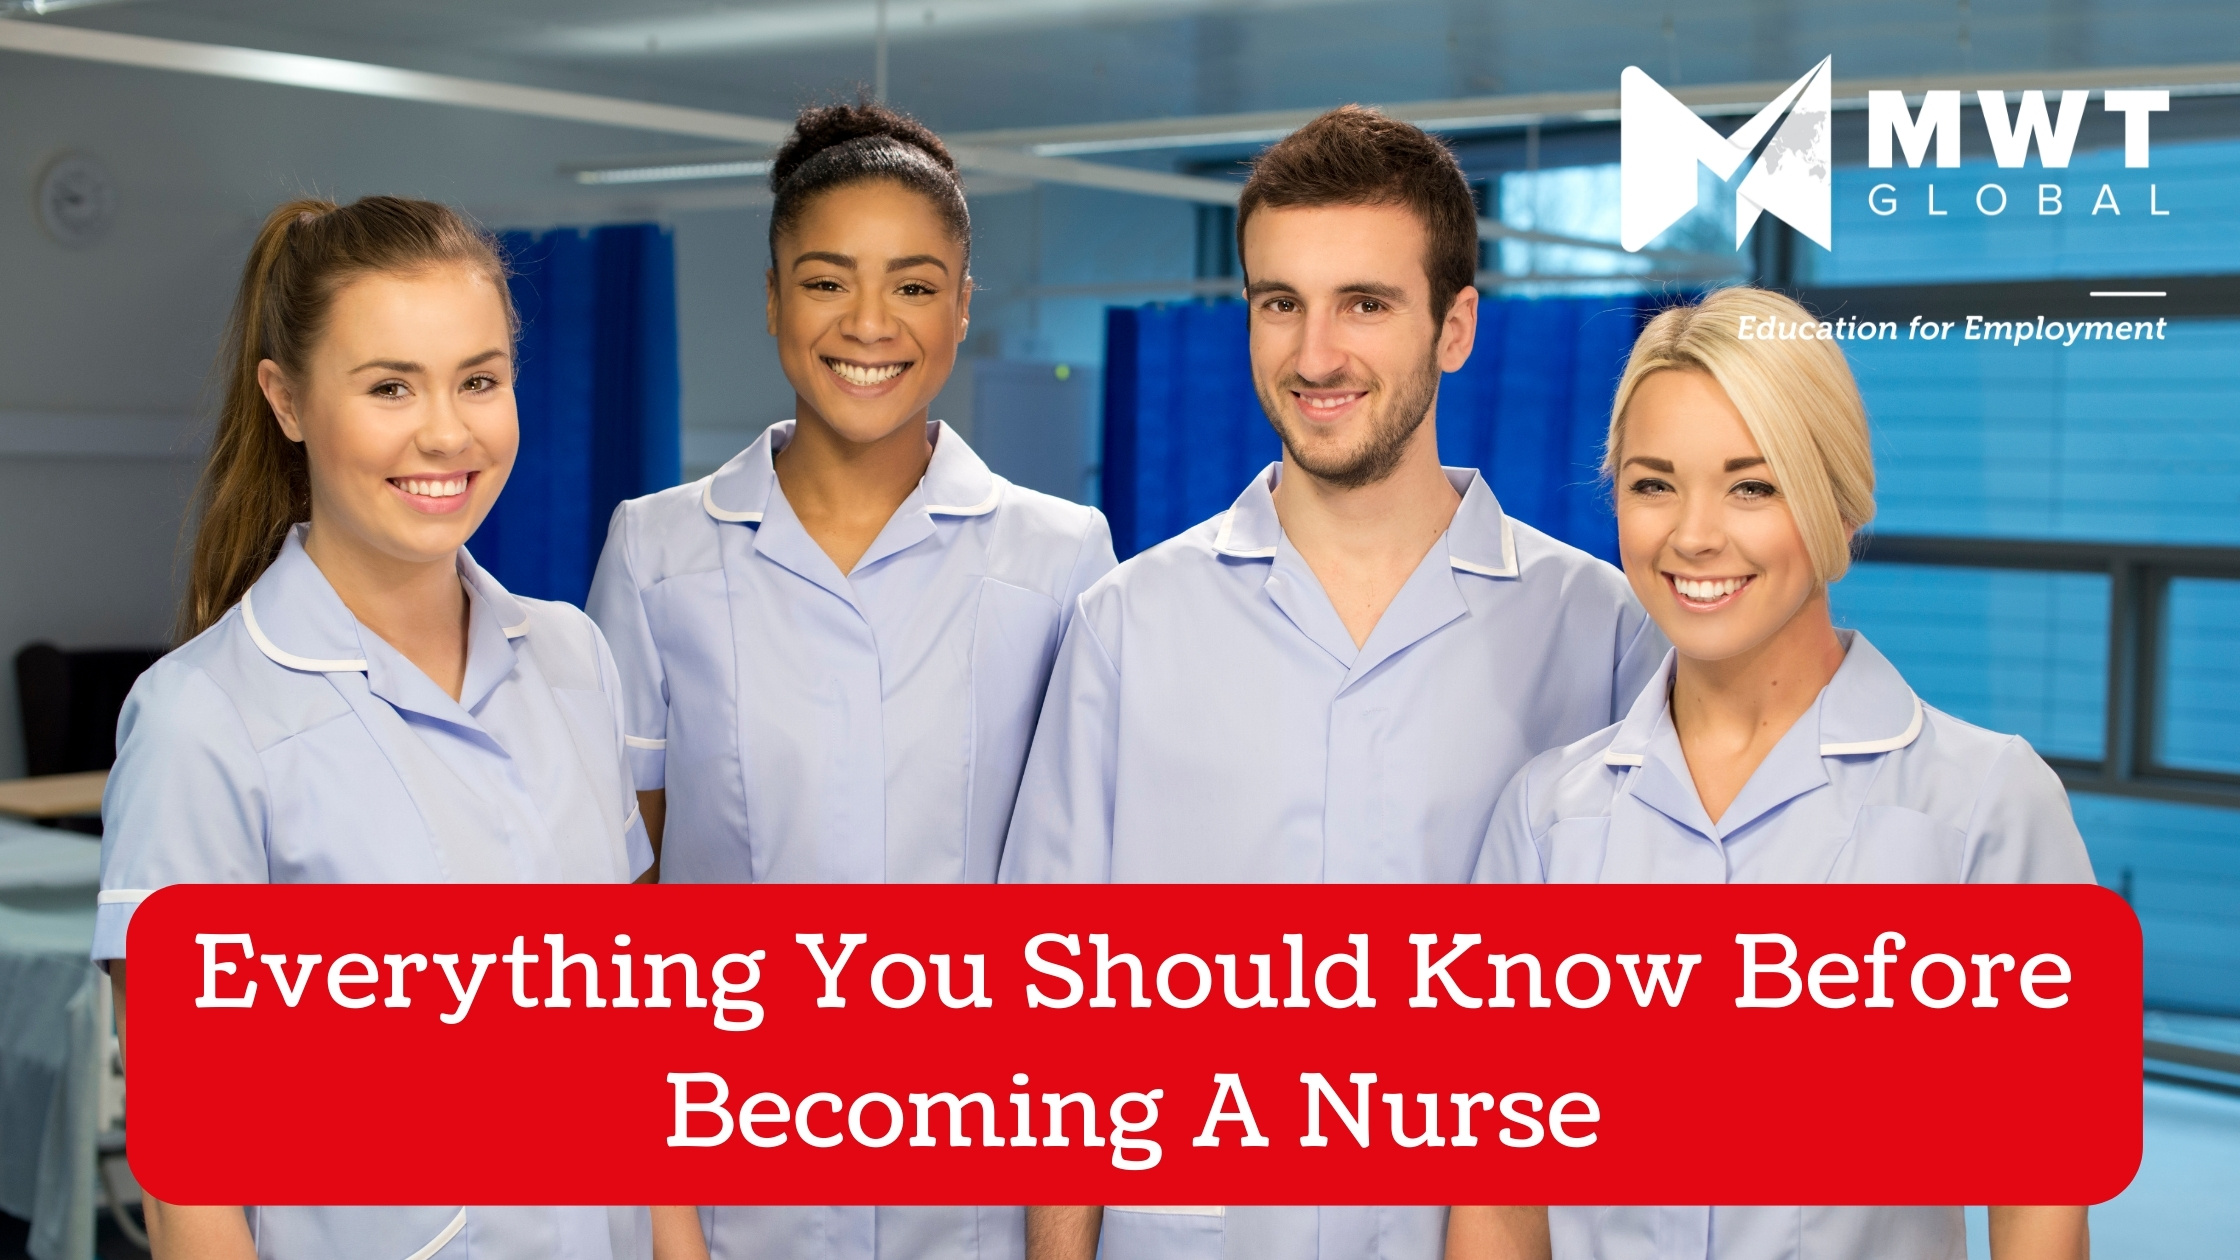 Read This Before You Decide to Become a Nurse